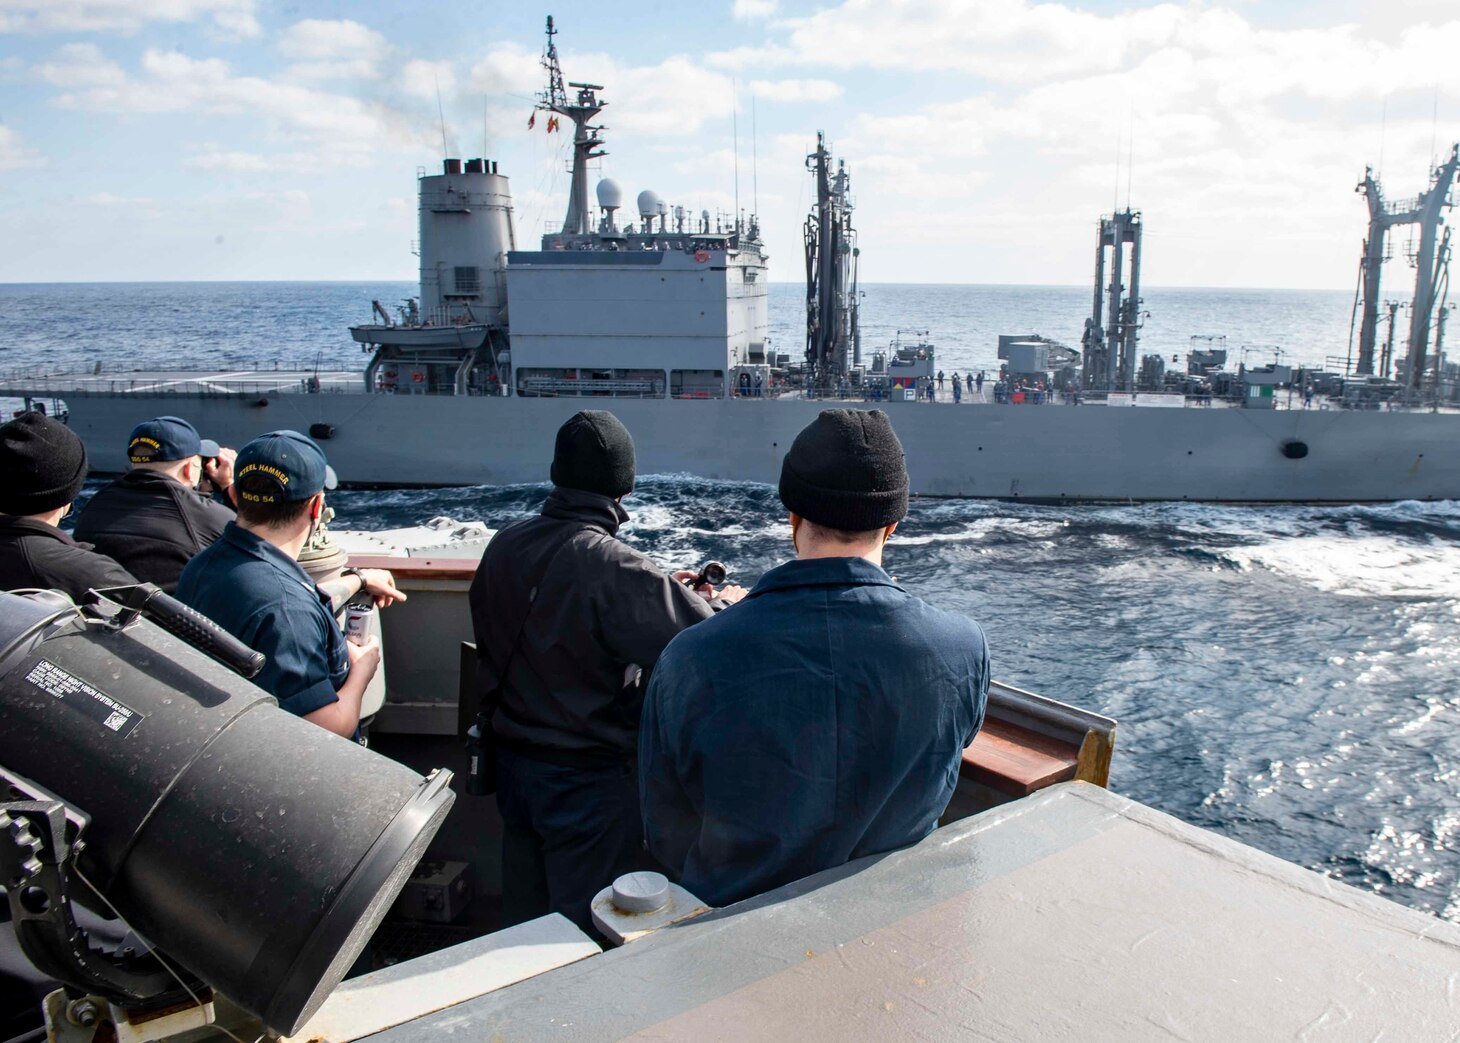 Sailors aboard the Arleigh Burke-class guided-missile destroyer USS Curtis Wilbur (DDG 54) man the bridge wing prior to a replenishment-at-sea with the Japanese Towada-class replenishment ship JS Hamana (AOE 424). Curtis Wilbur is assigned to Destroyer Squadron (DESRON) 15, the Navy's largest forward-deployed DESRON and the U.S. 7th Fleet's principal surface force.